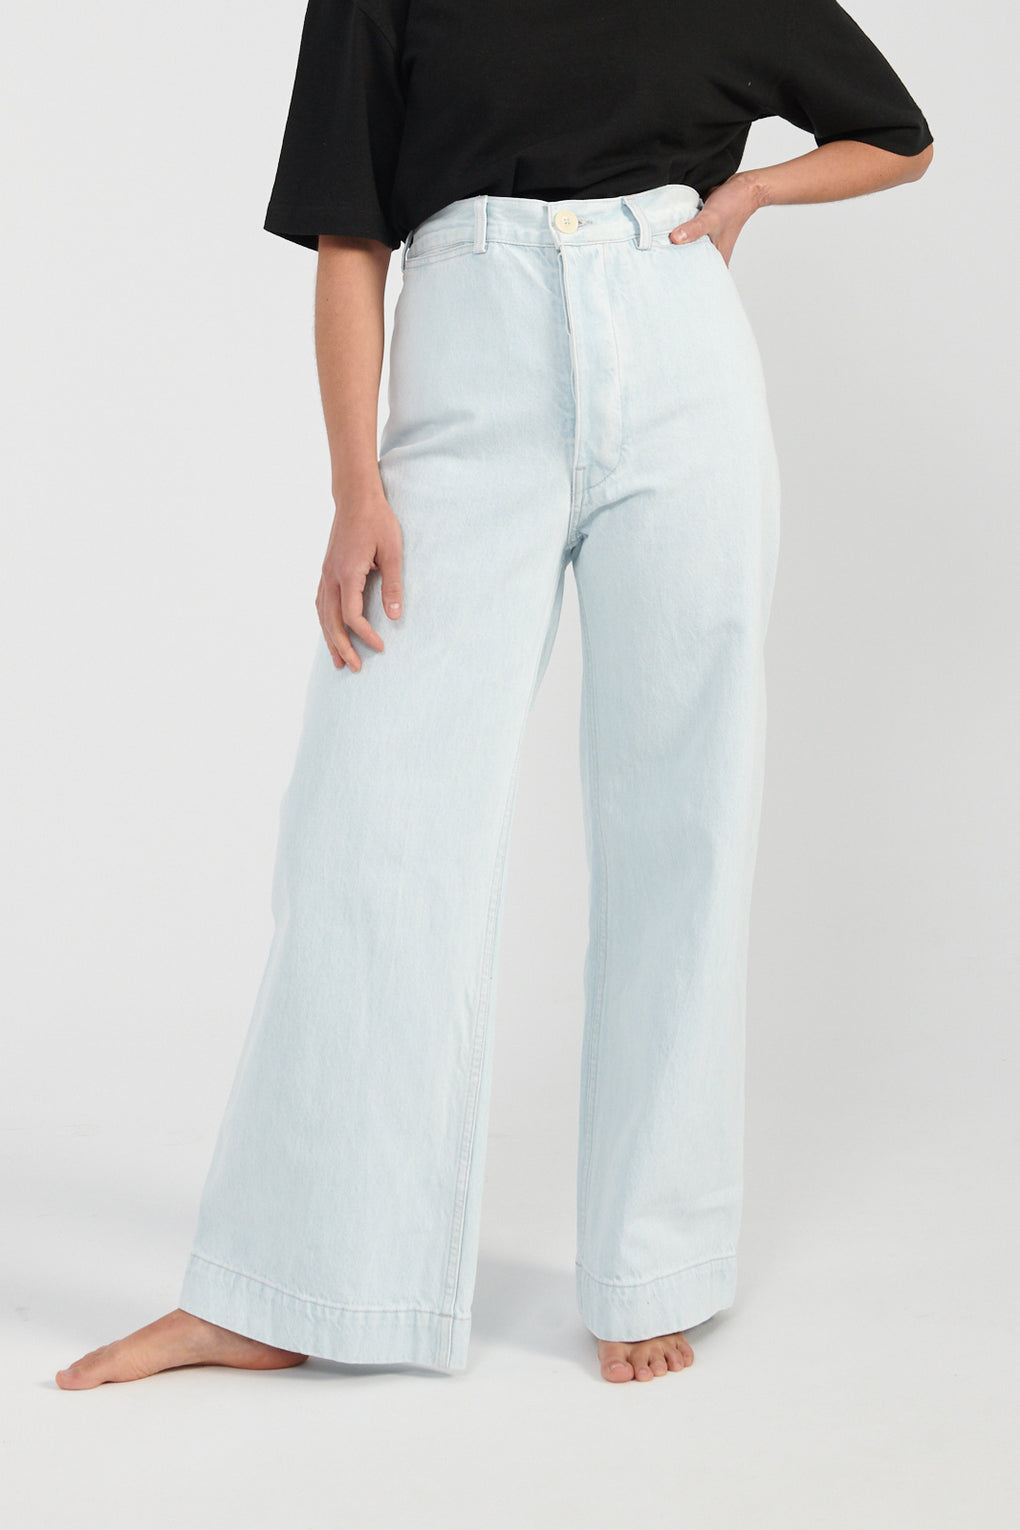 Women's Denim Chambray Sailor Pant - Full Length made with Organic Cotton |  Pact